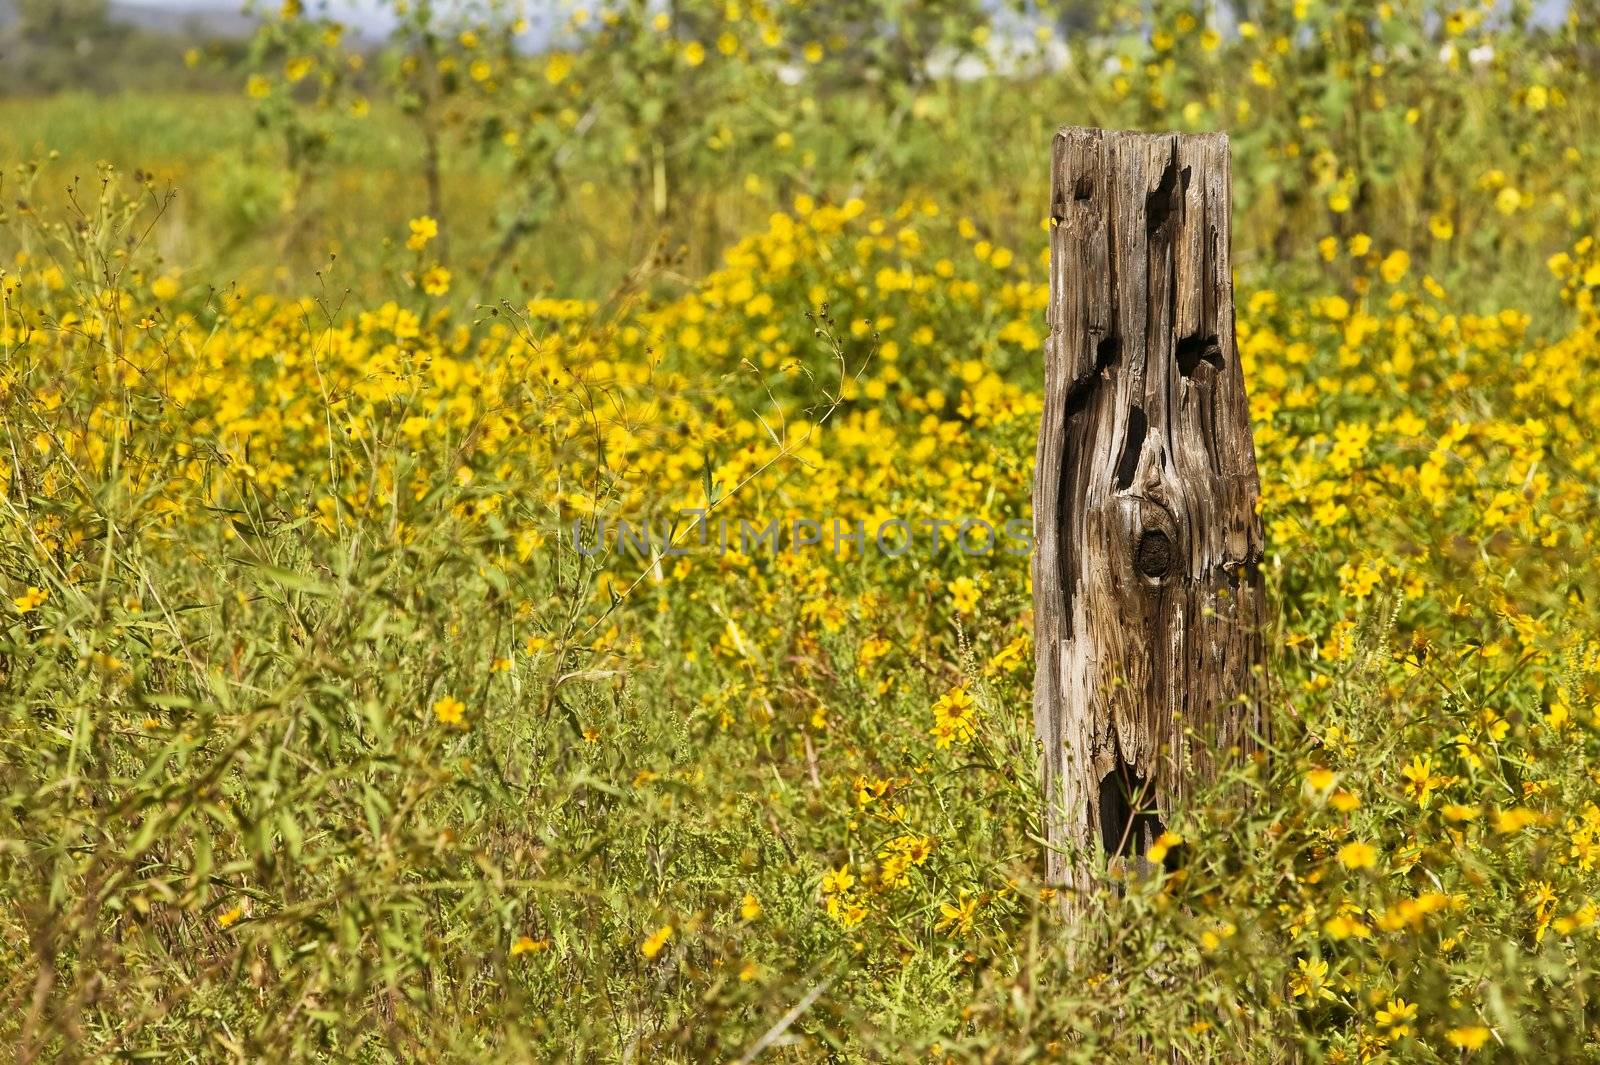 Rural scene of an old wooden post and a carpet of yellow flowers